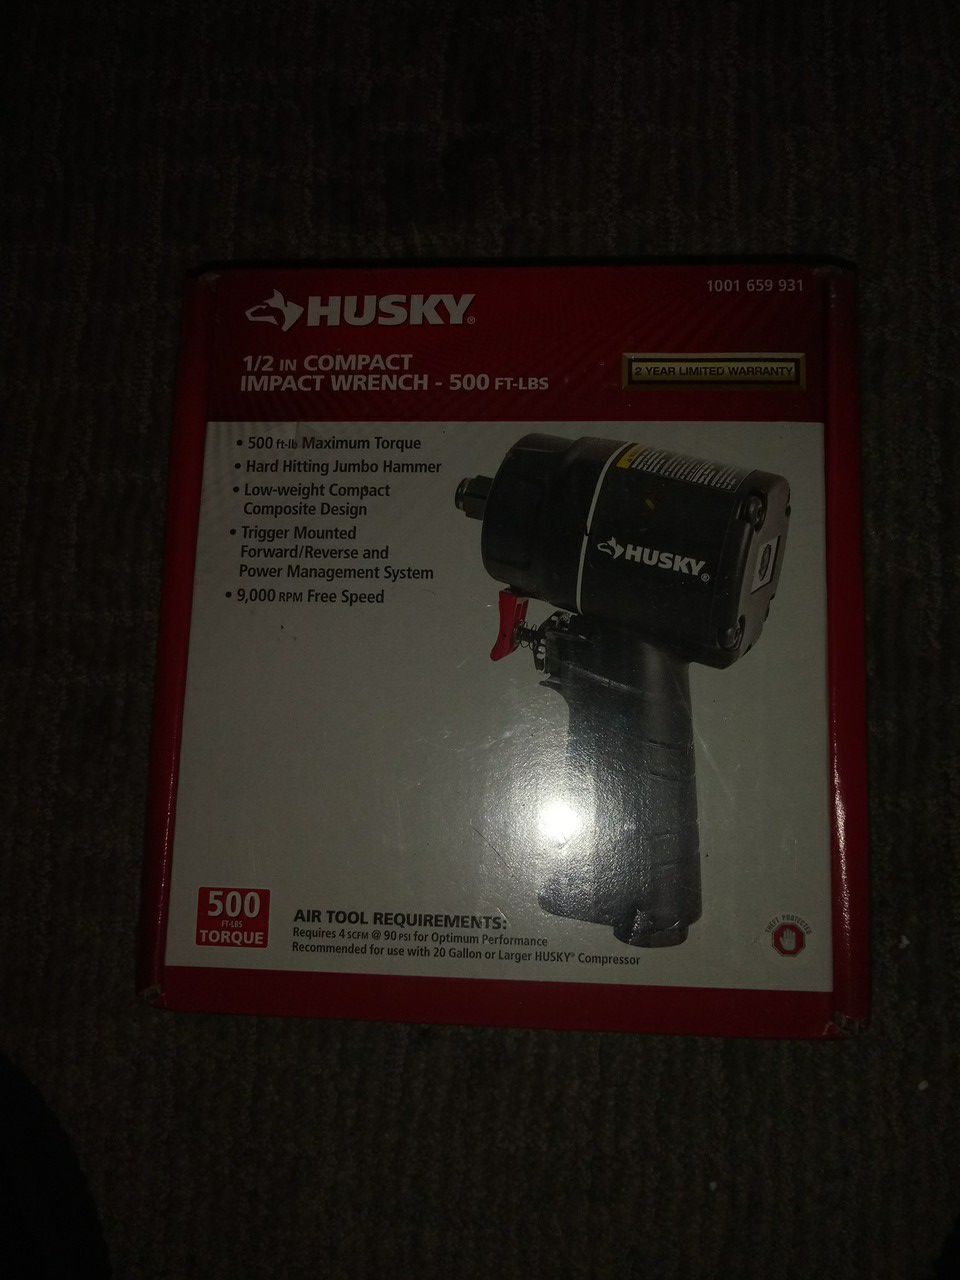 Husky 1/2 in compact impact wrench